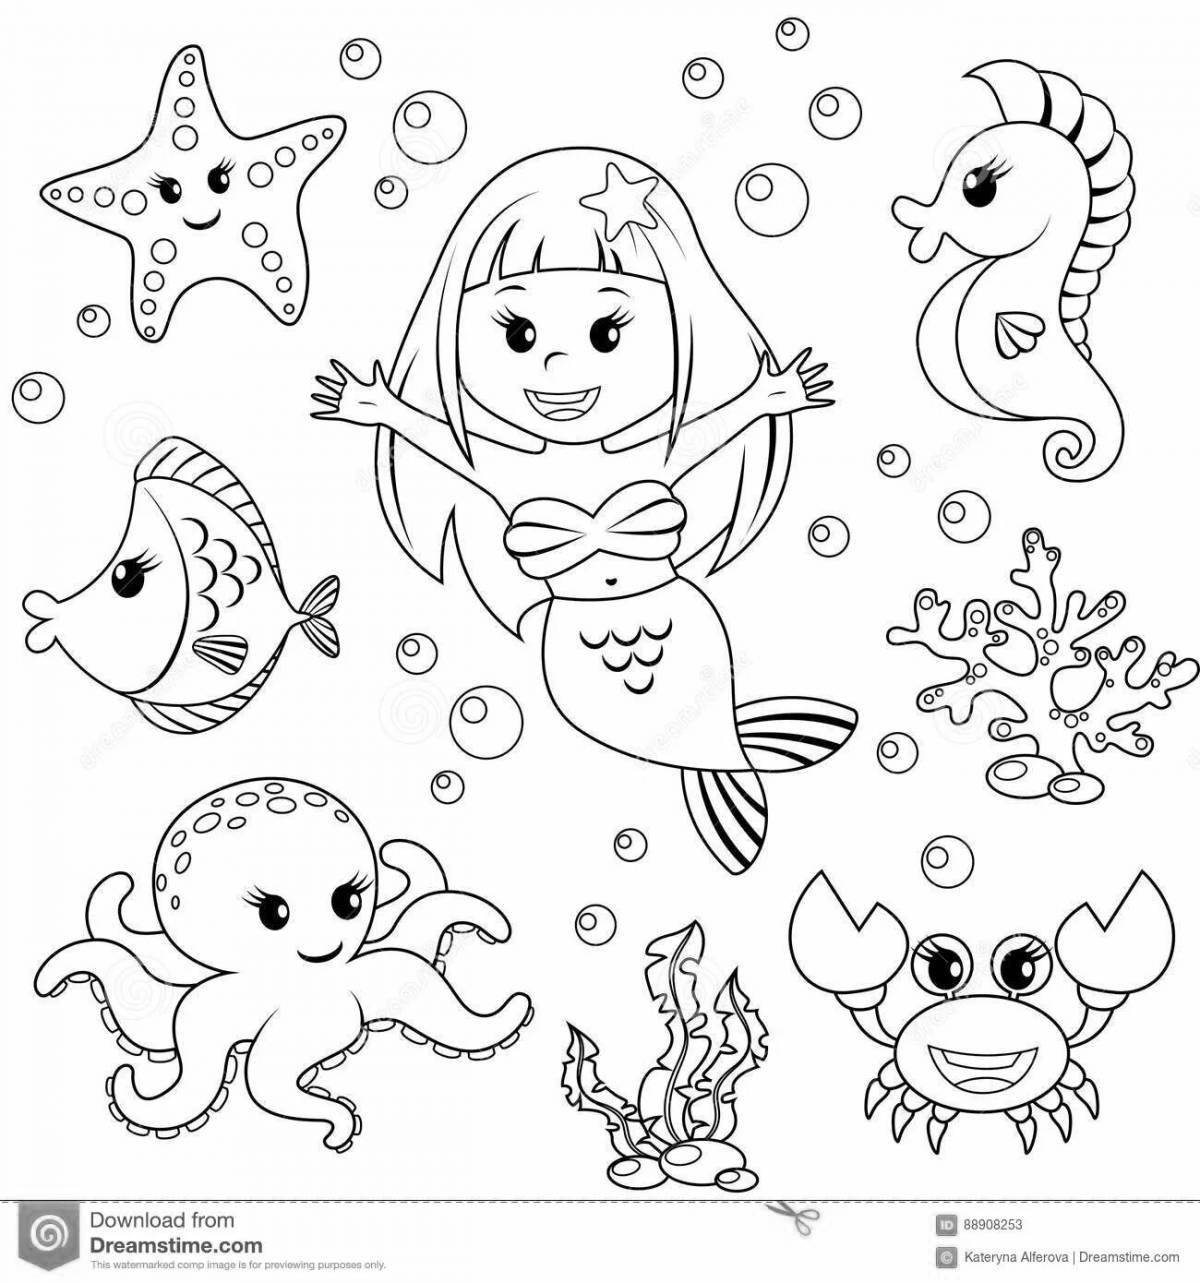 Fun marine life coloring page for 3-4 year olds